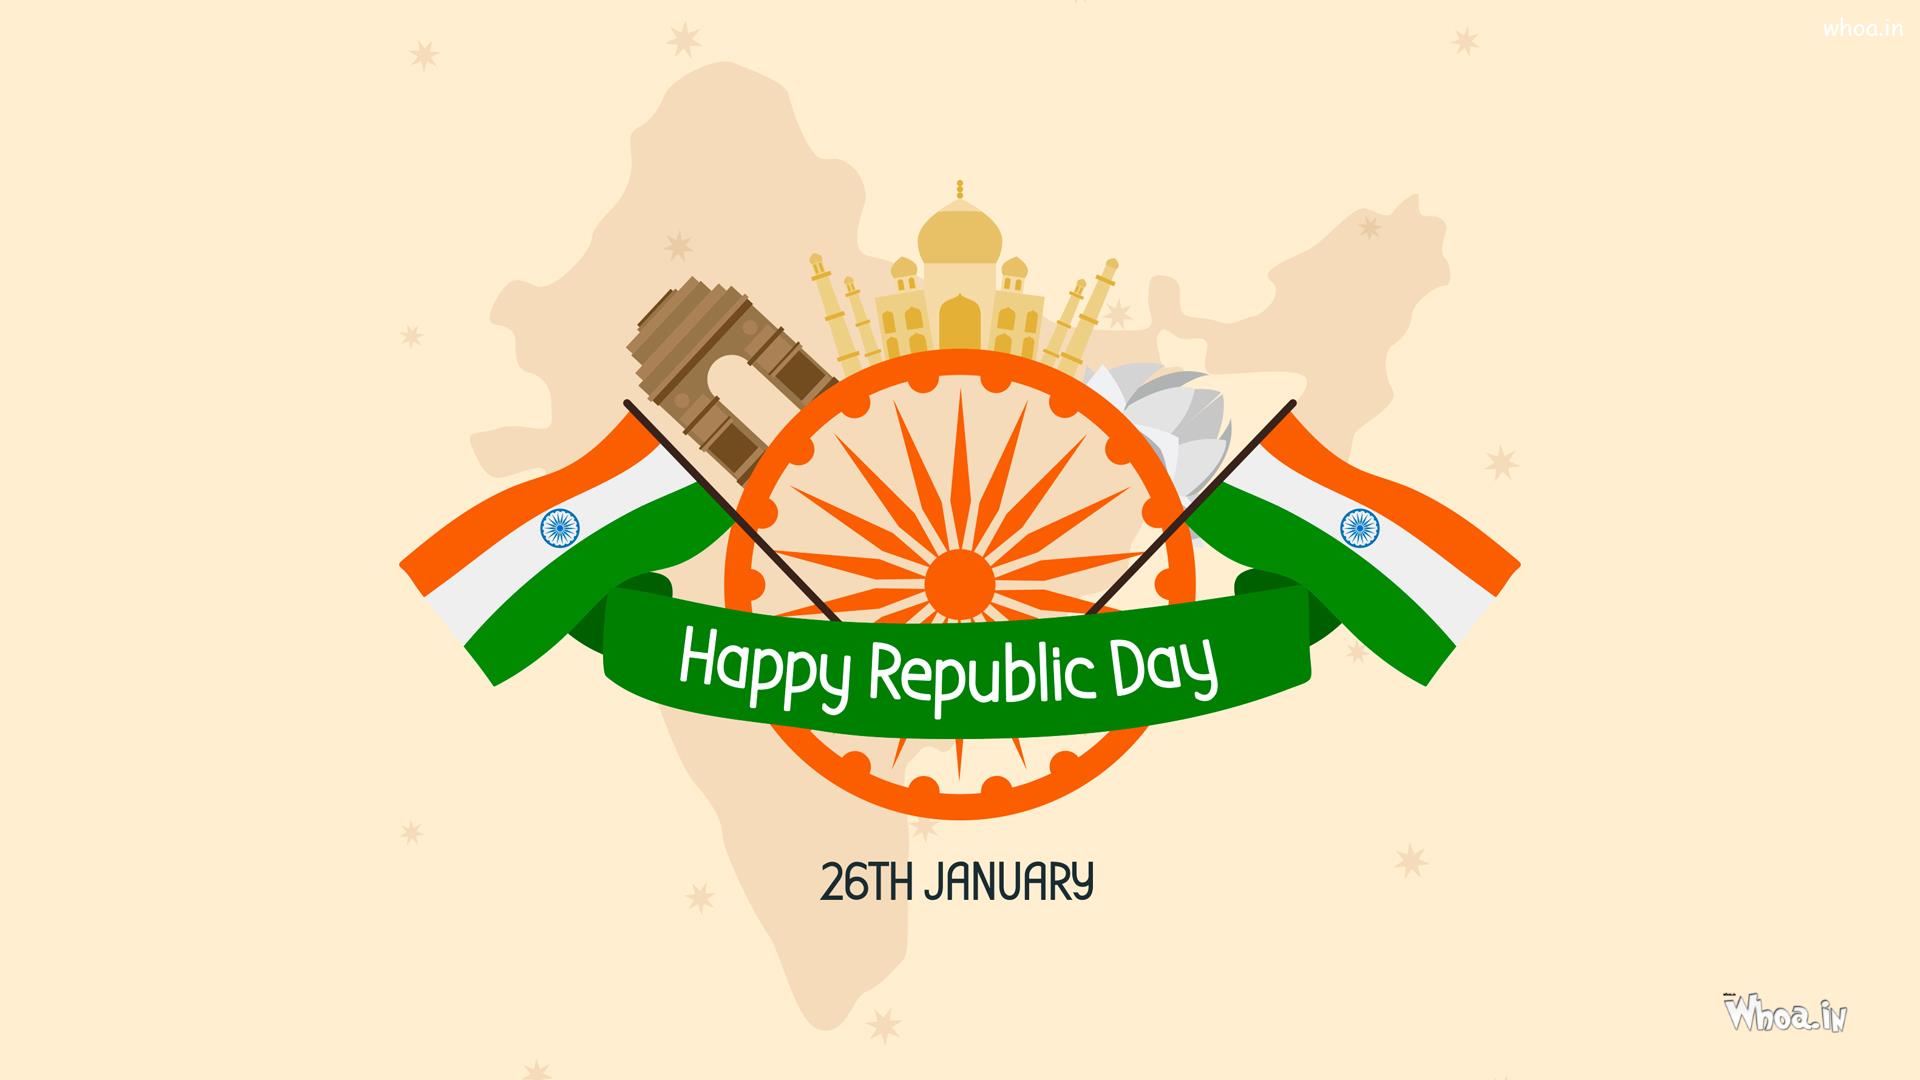 Happy Republic Day 26Th January Images Wallpapers #3 Republic-Day Wallpaper